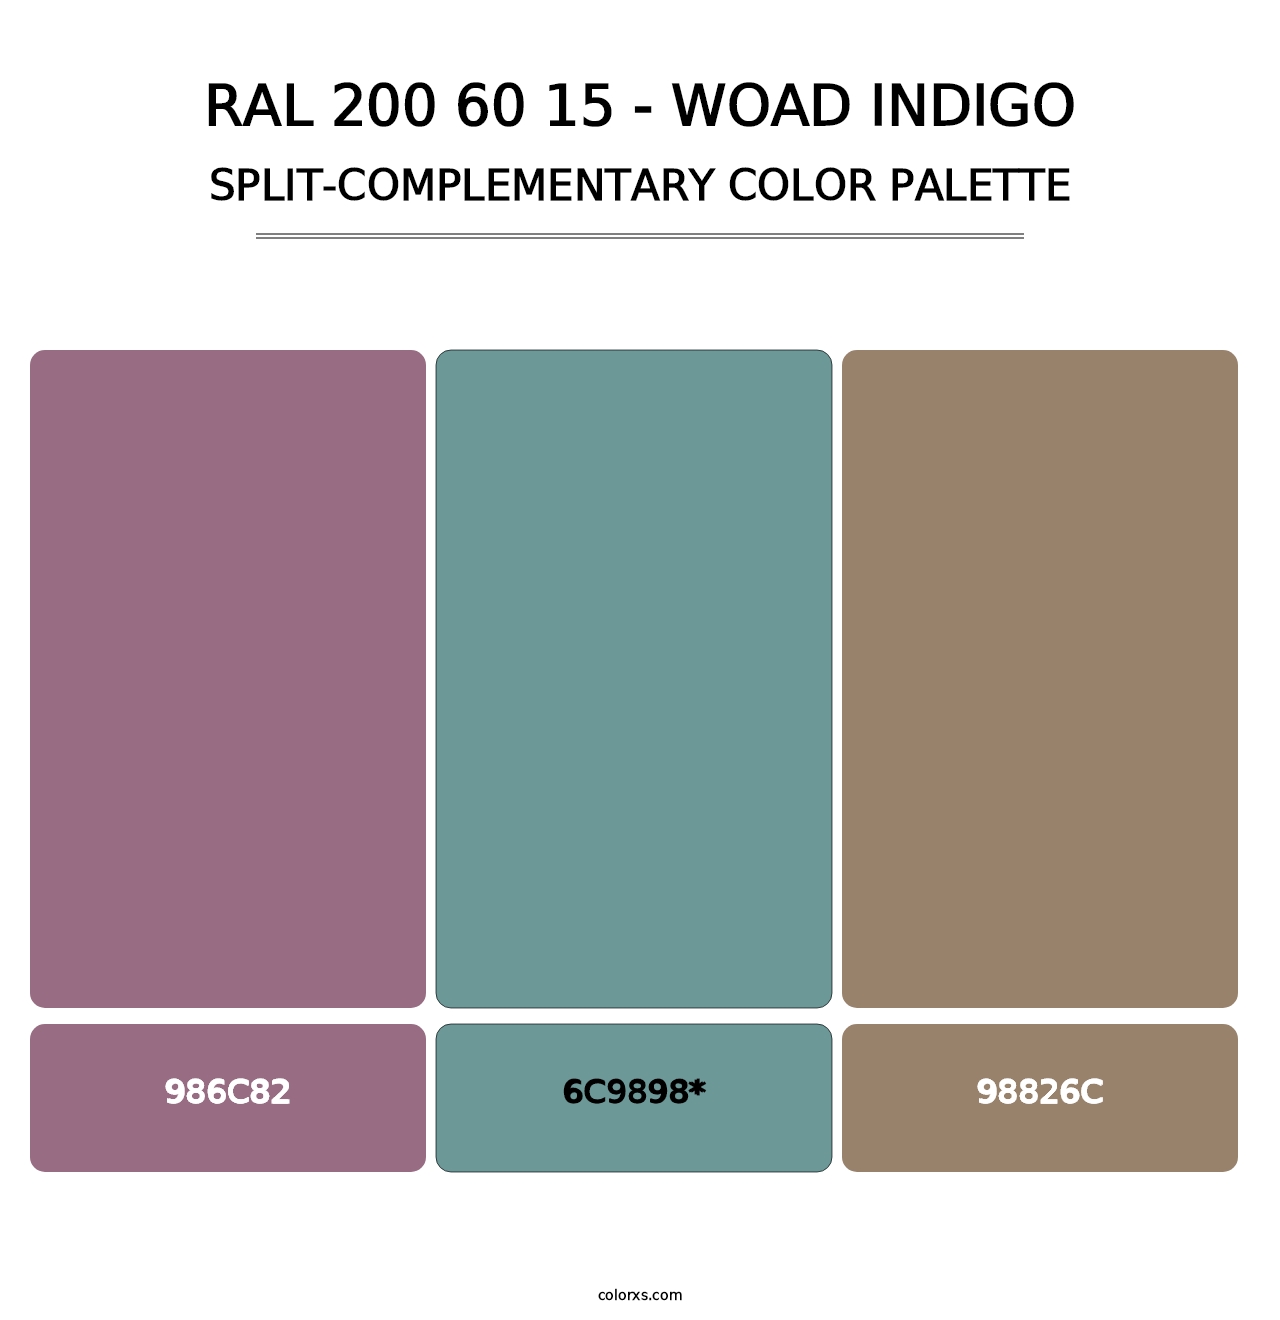 RAL 200 60 15 - Woad Indigo - Split-Complementary Color Palette